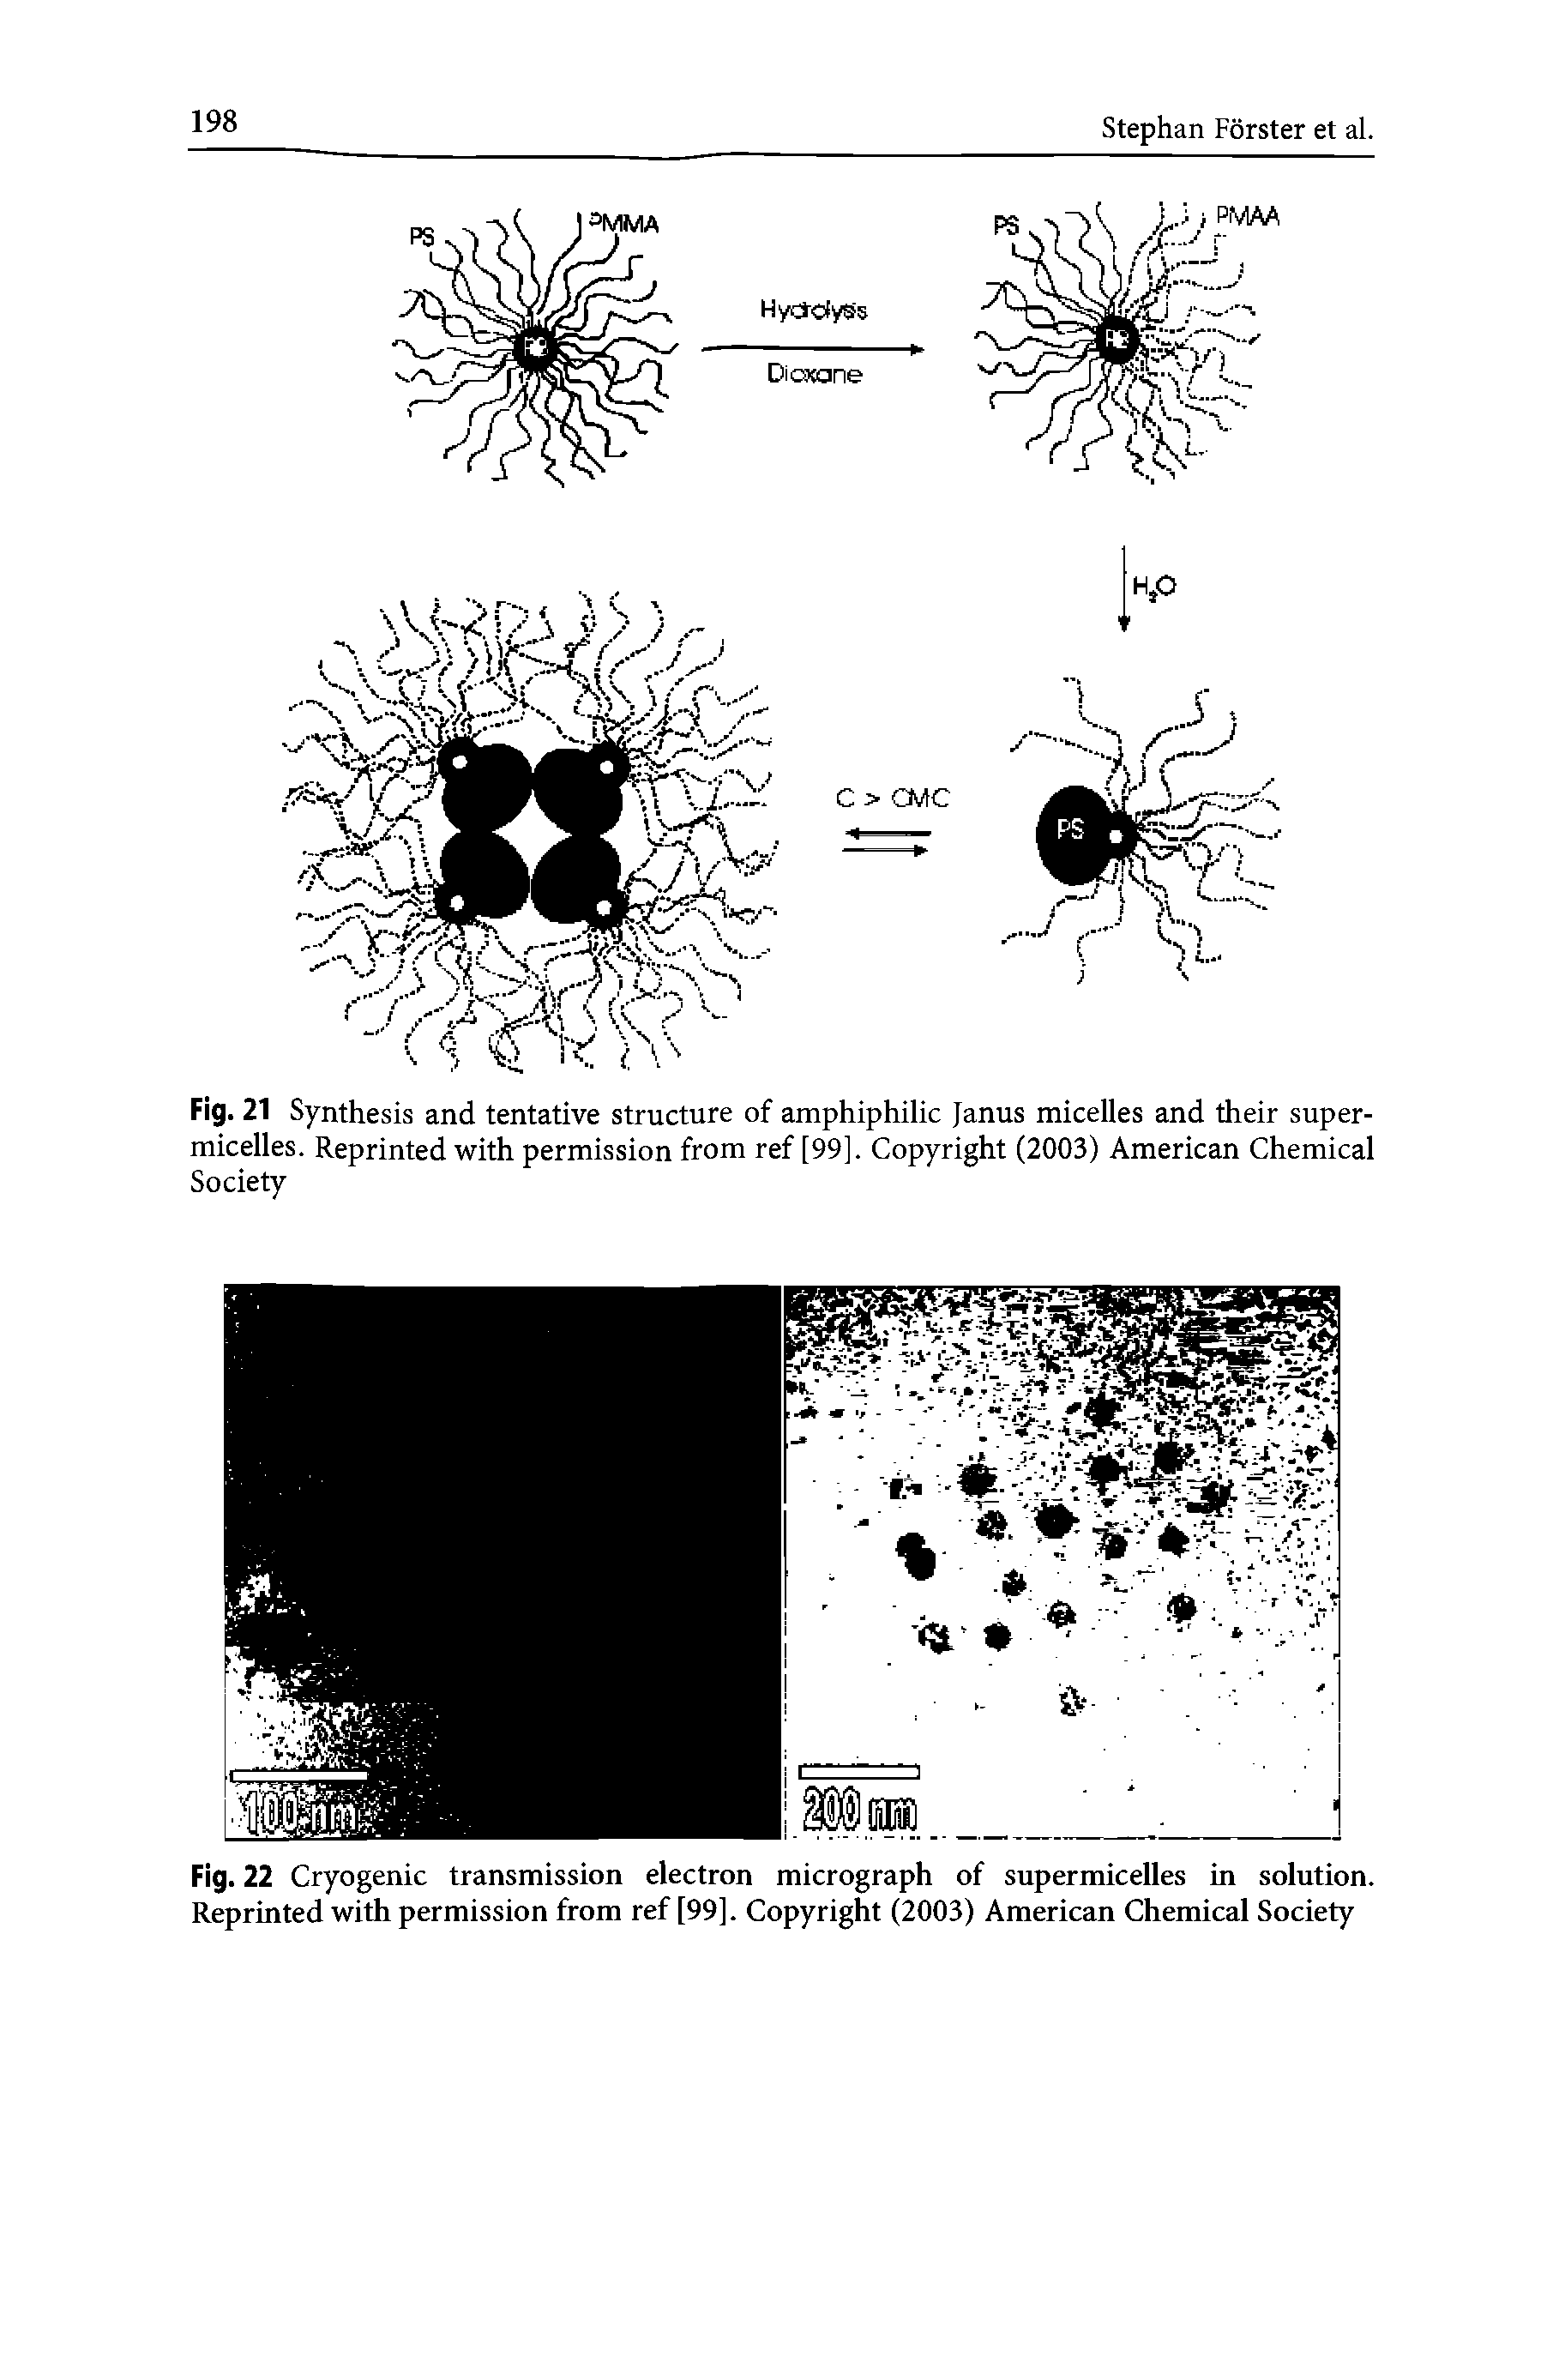 Fig. 22 Cryogenic transmission electron micrograph of supermicelles in solution. Reprinted with permission from ref [99]. Copyright (2003) American Chemical Society...